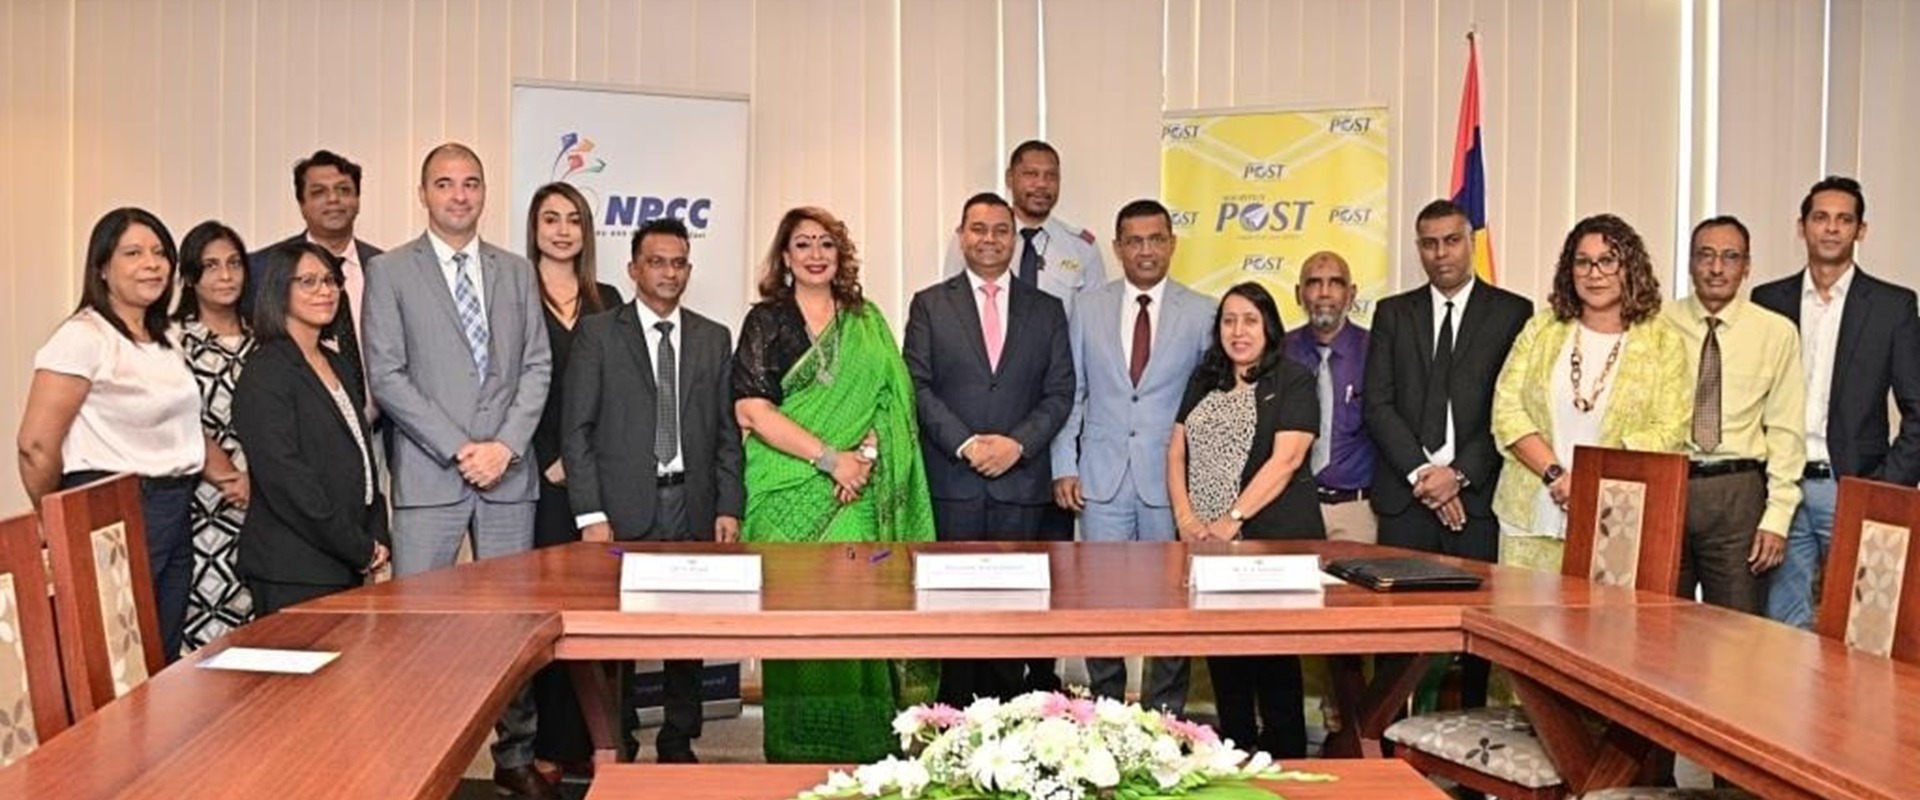 The NPCC signs a MoU with Mauritius Post to deliver training on Customer Service to 800 postmen and assistant postmen